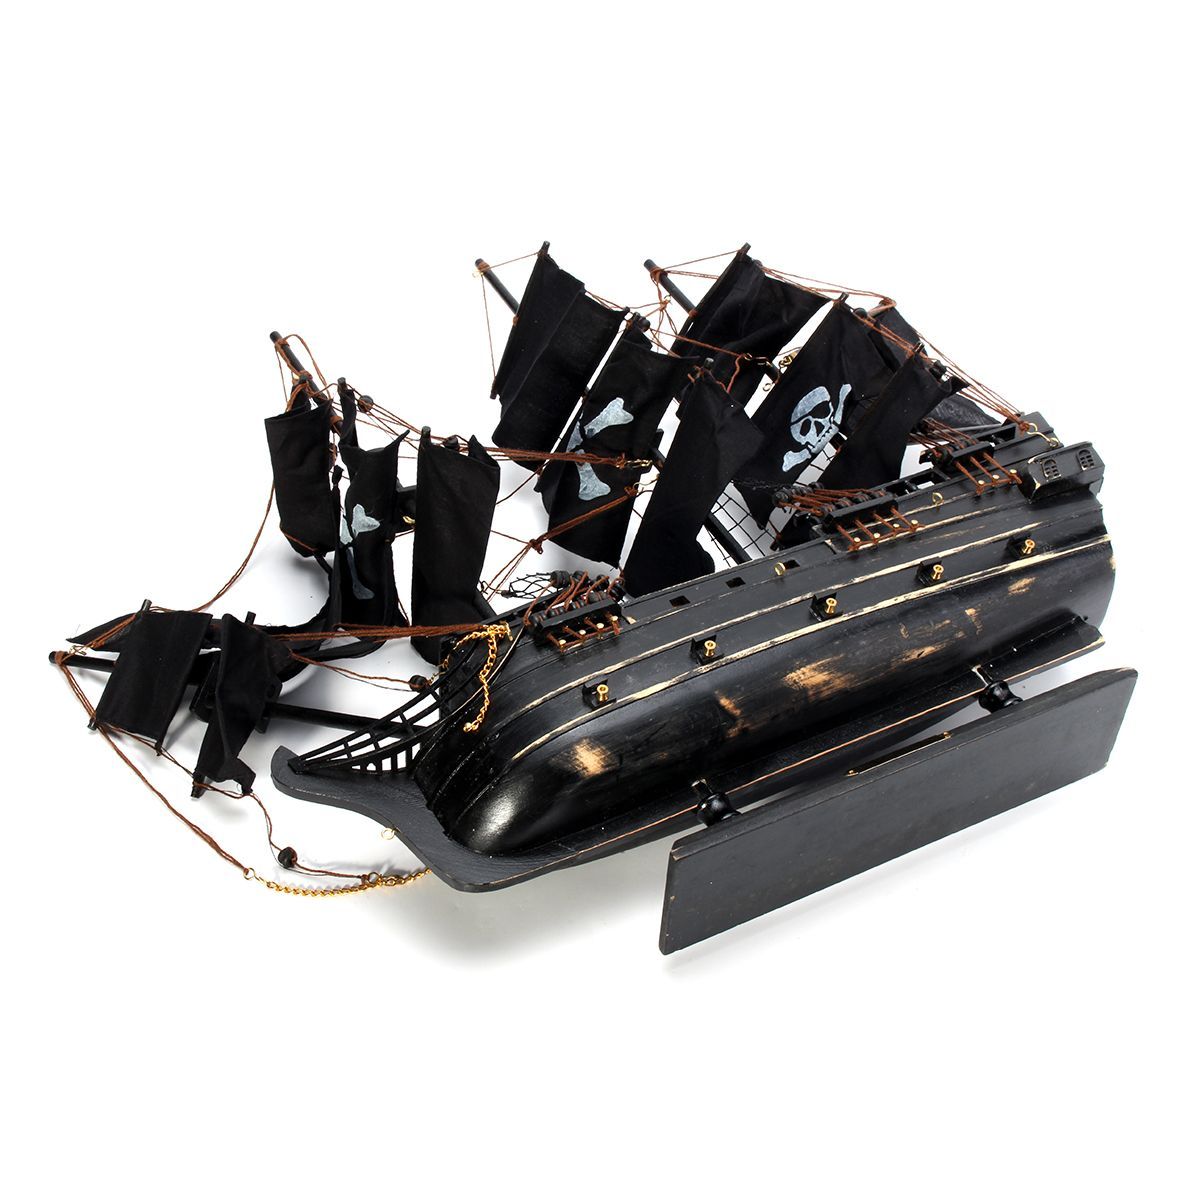 Black-Model-Pirate-Ship-Vintage-Wooden-Sailboat-Home-Decorations-Boat-Gift-Toy-1583877